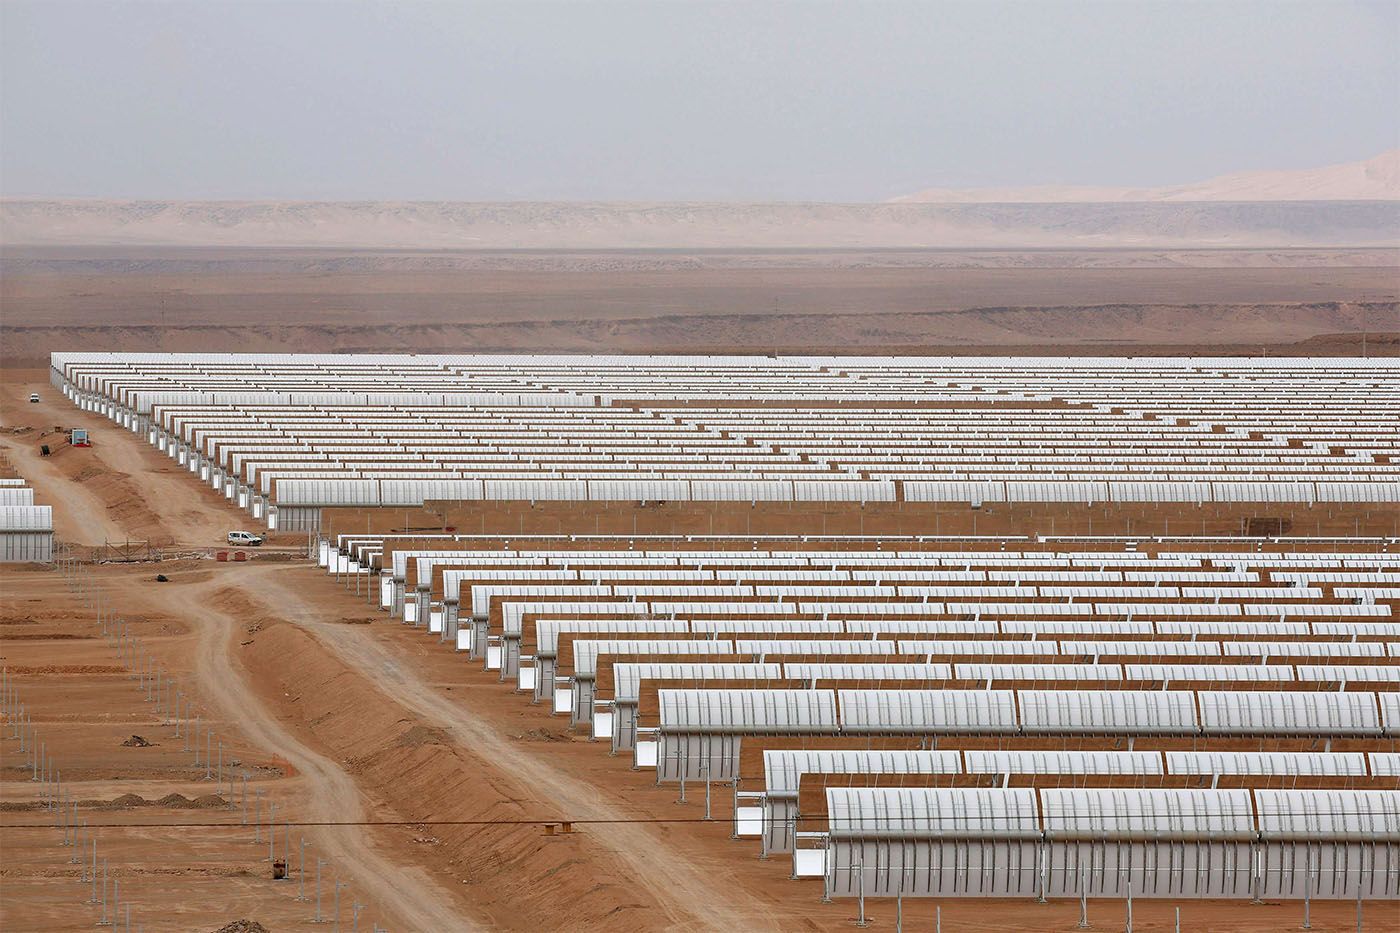 A thermosolar power plant is pictured at Noor II near the city of Ouarzazate, Morocco